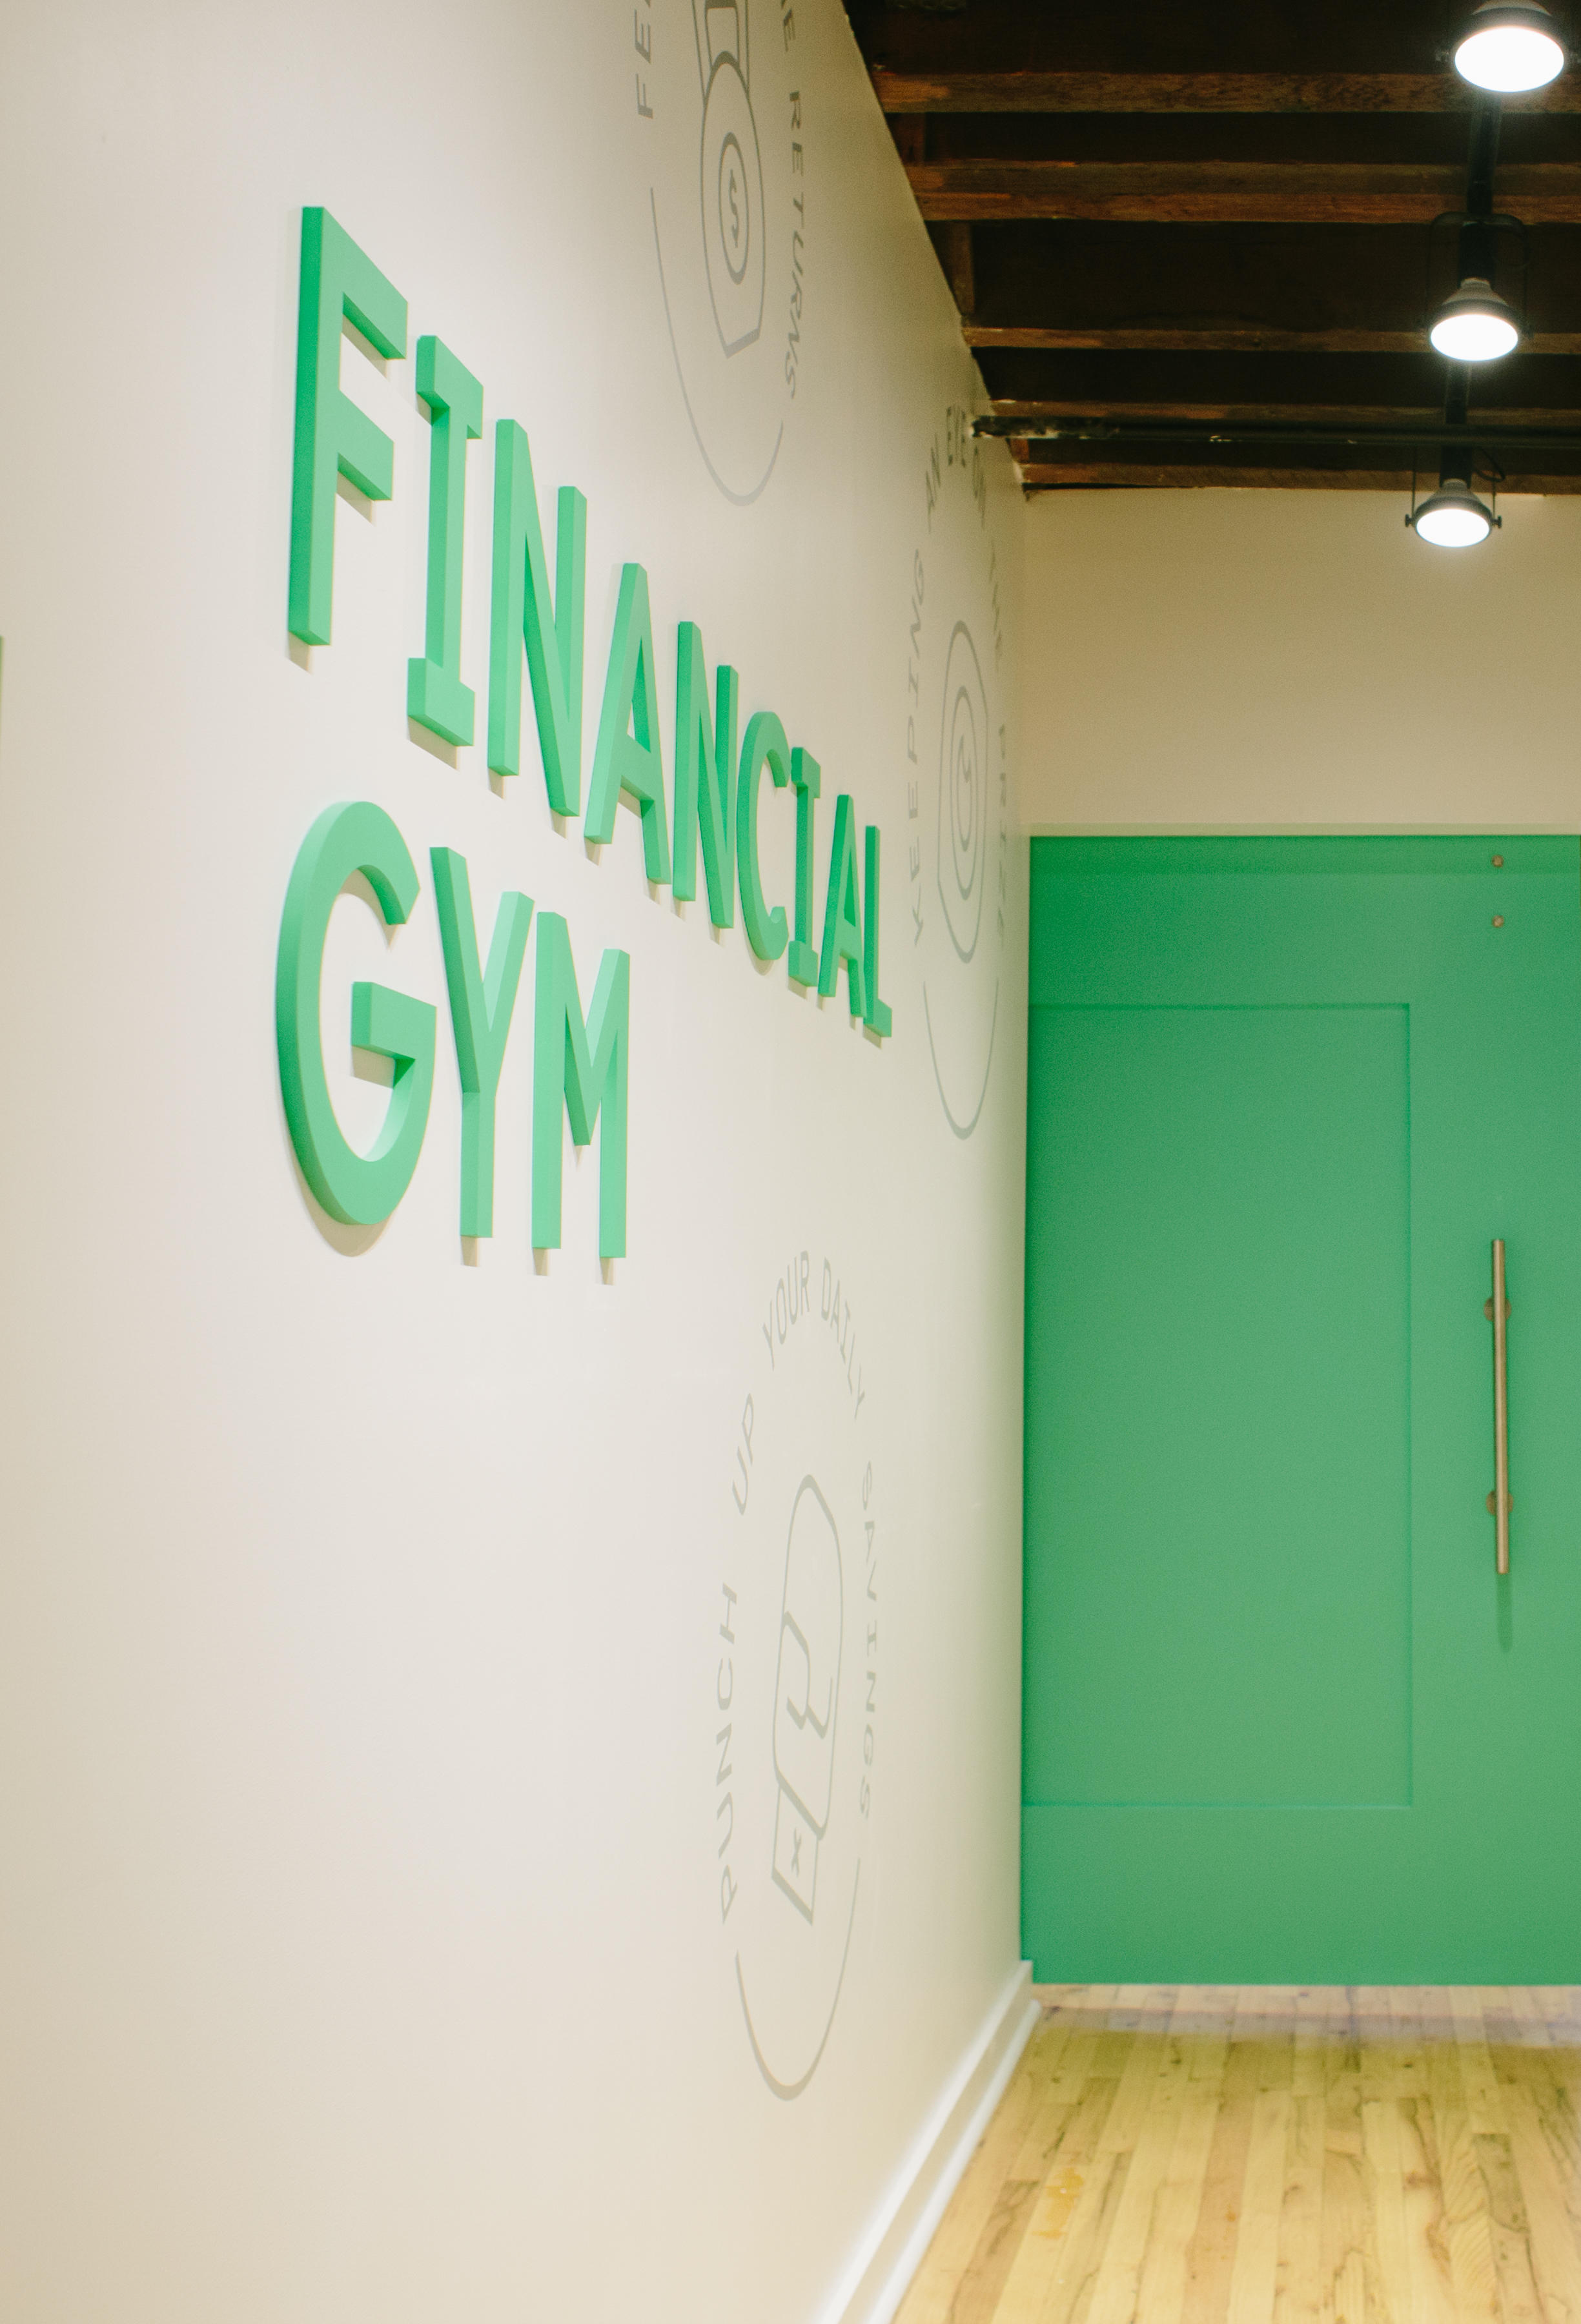 The Financial Gym Photo